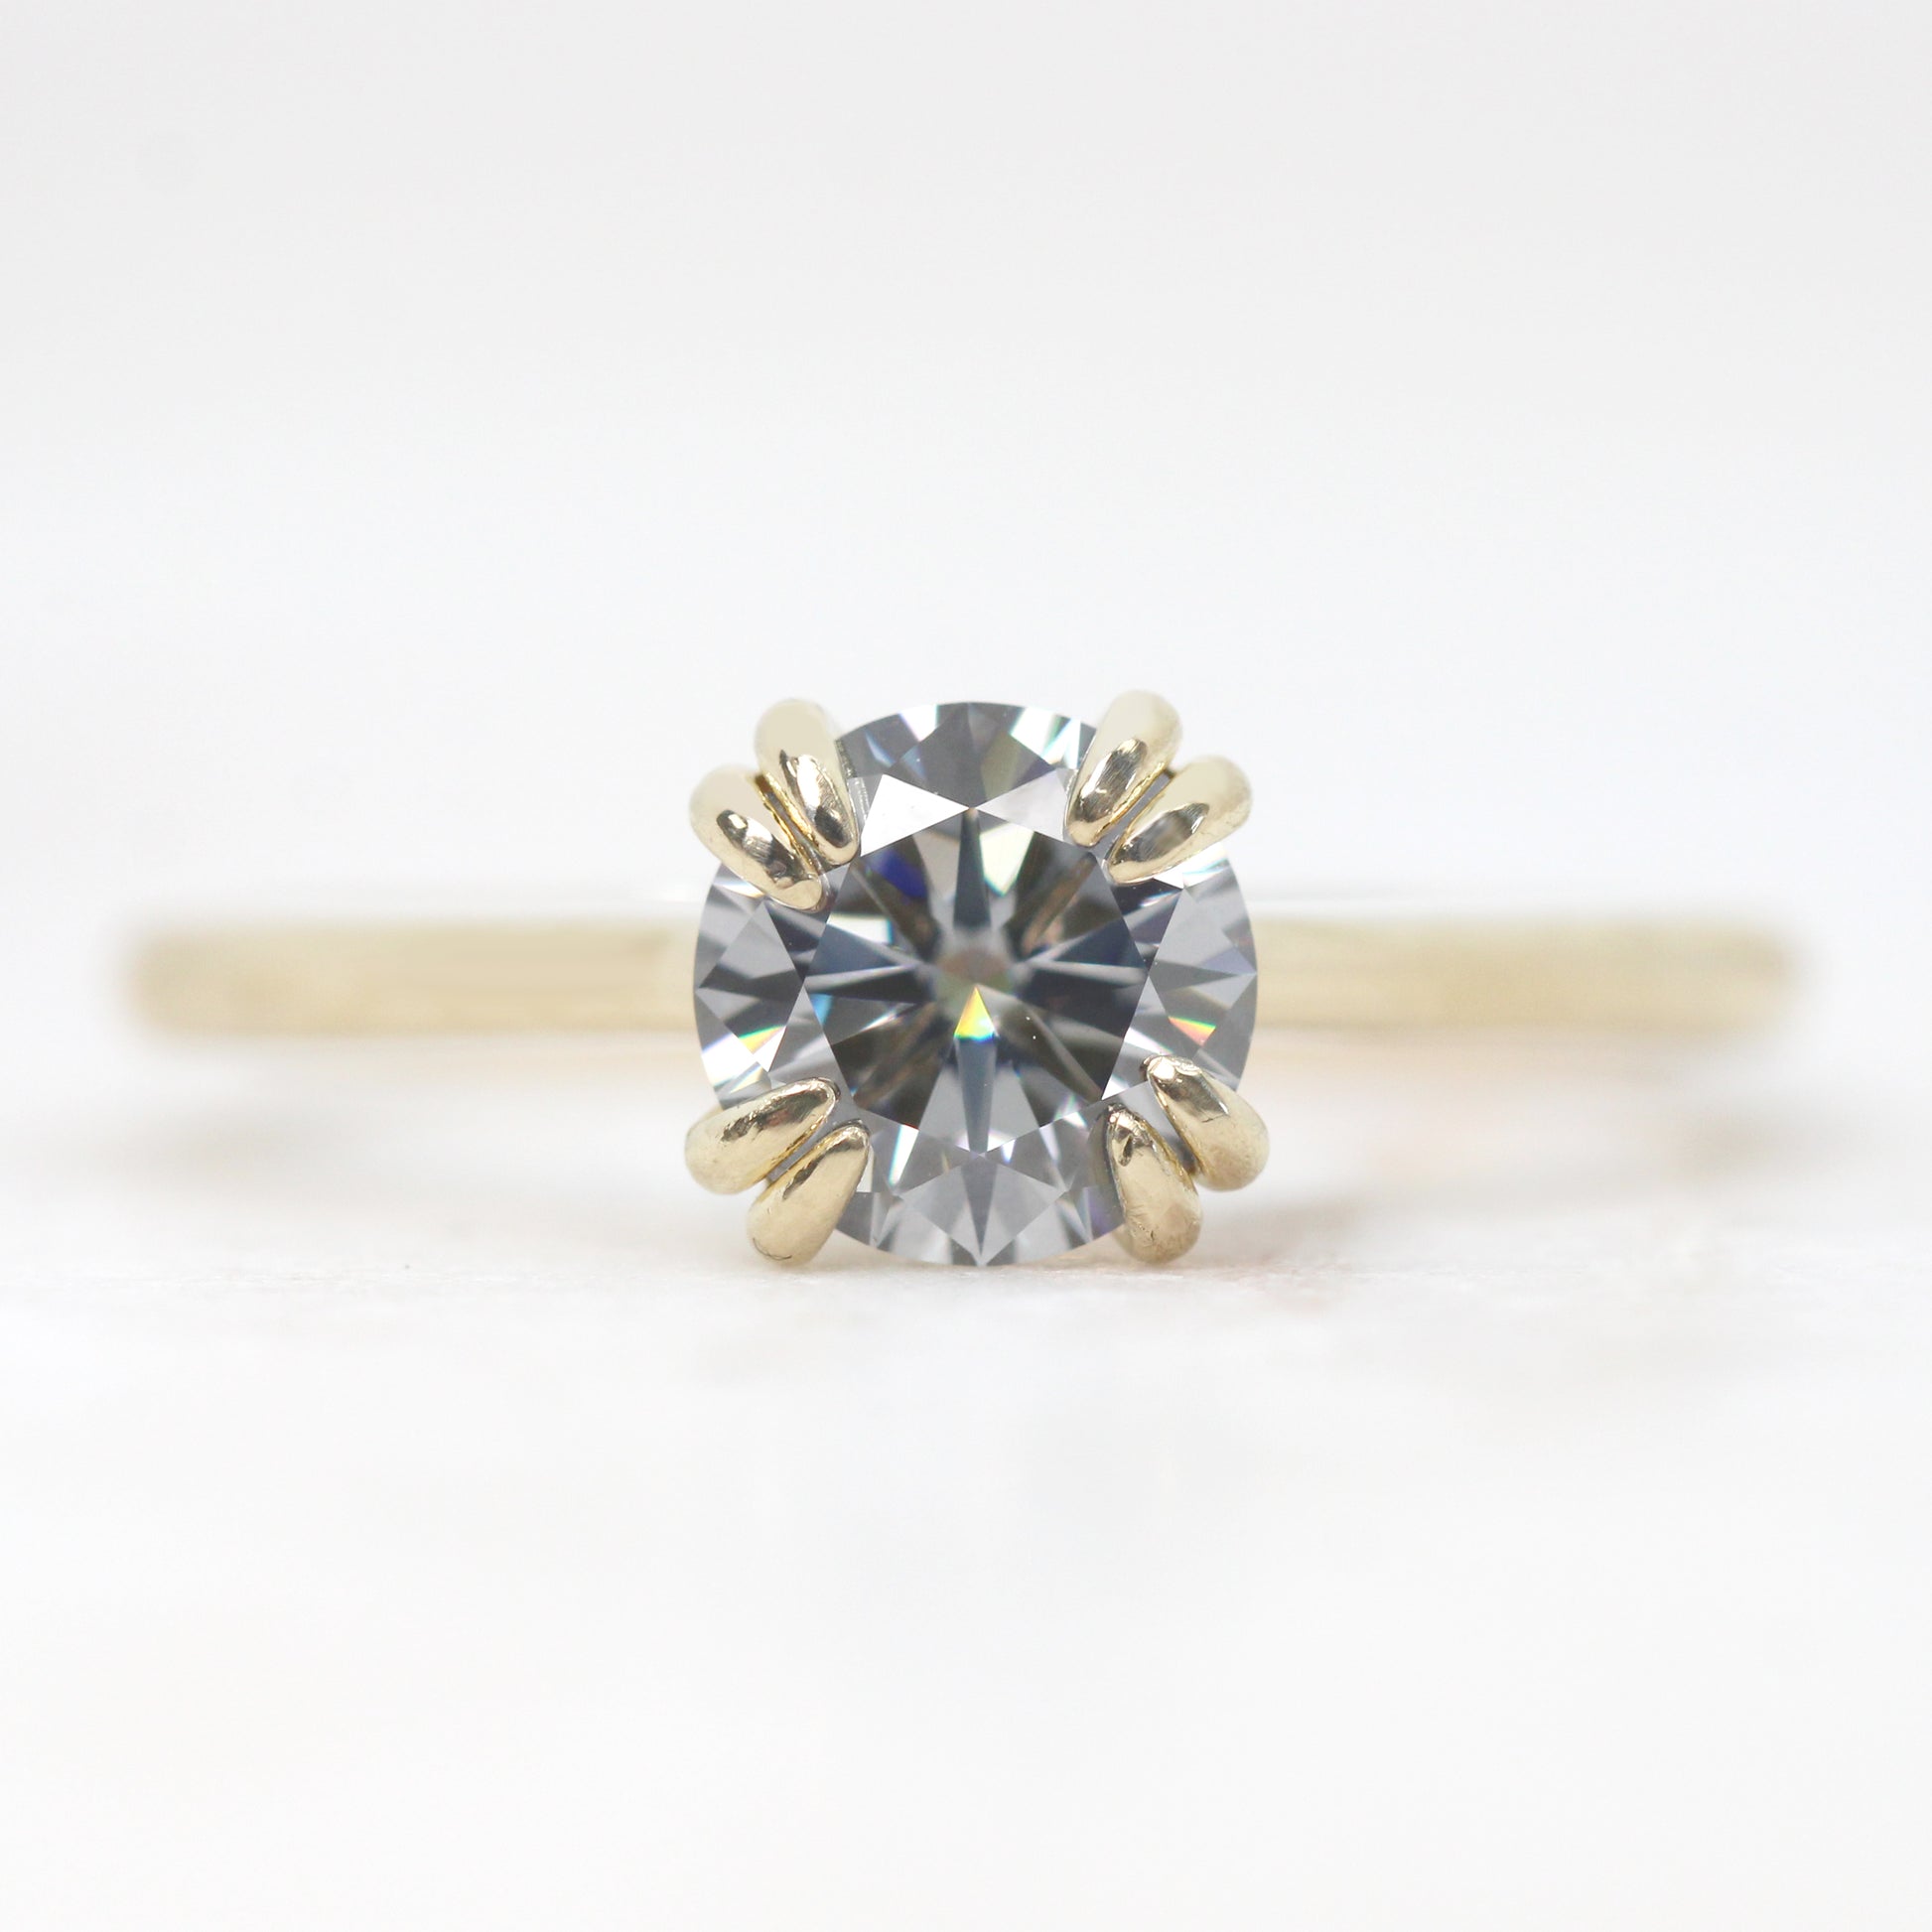 Nesta Ring with a 1.00 Carat Round Gray Moissanite - Made to Order, Choose Your Gold Tone - Midwinter Co. Alternative Bridal Rings and Modern Fine Jewelry